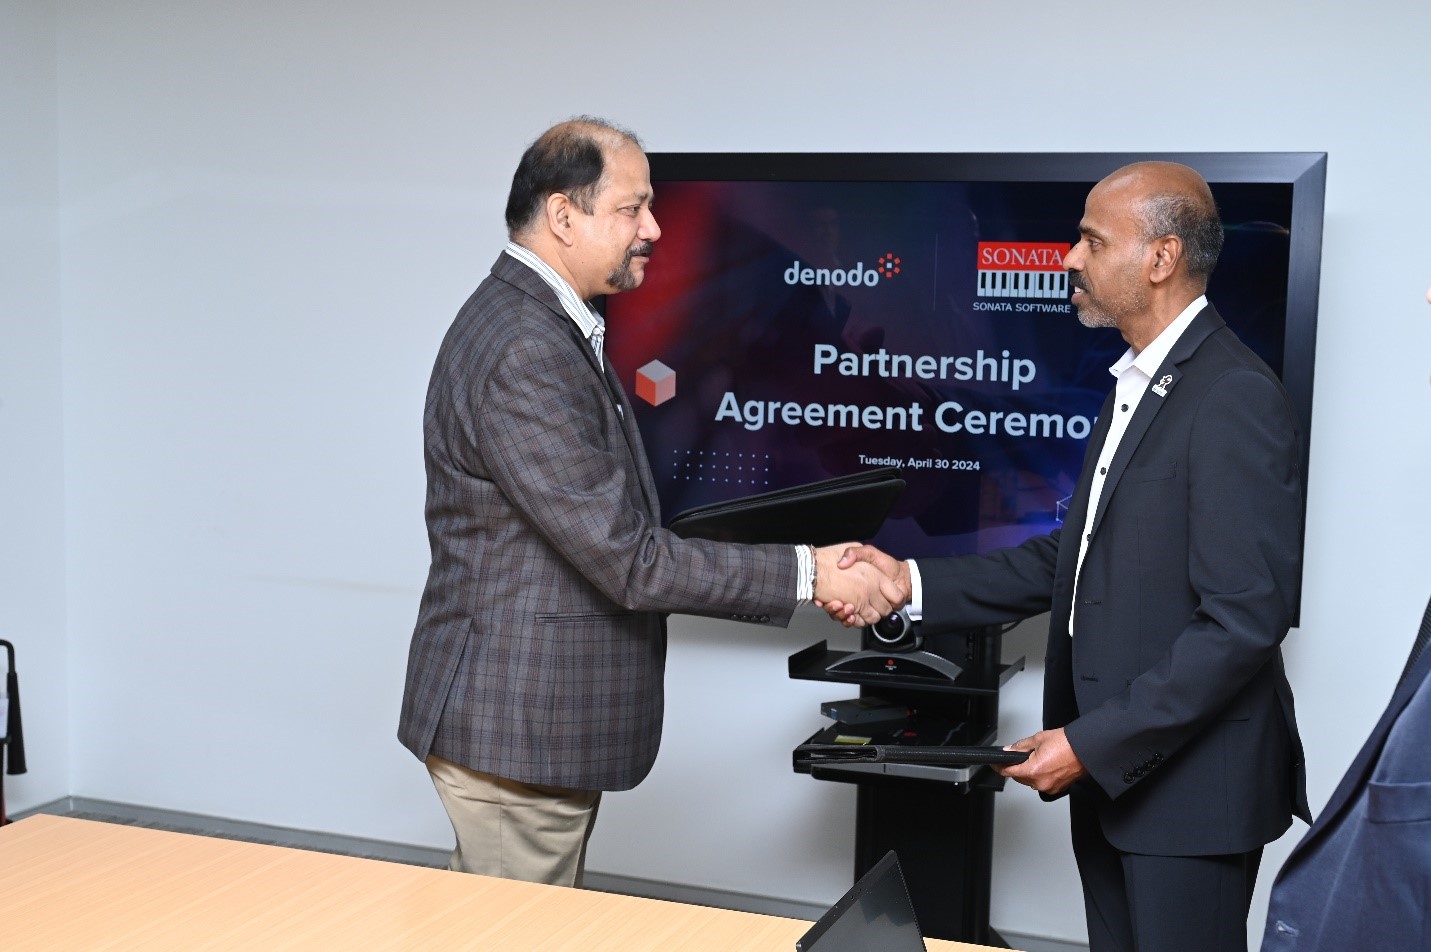 The Partnership Agreement Ceremony_ Sujit Mohanty, Managing Director and Chief Executive Officer, SITL and Ravi Shankar, Senior Vice President and Chief Marketing Officer, Denodo